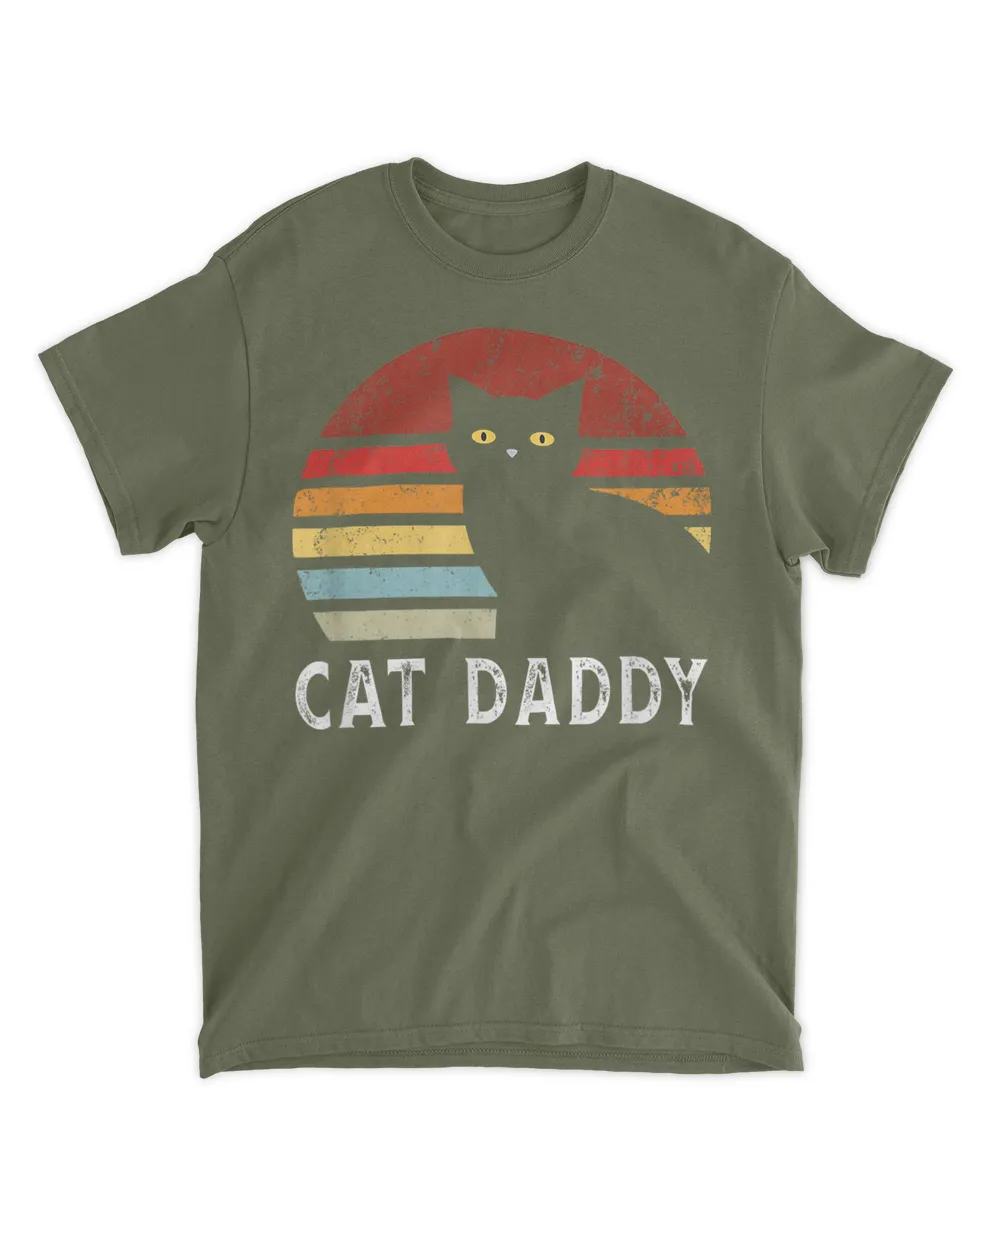 Vintage Sunset Cat Dad-dy Mom-my, Boy Girl Funny T-Shirt